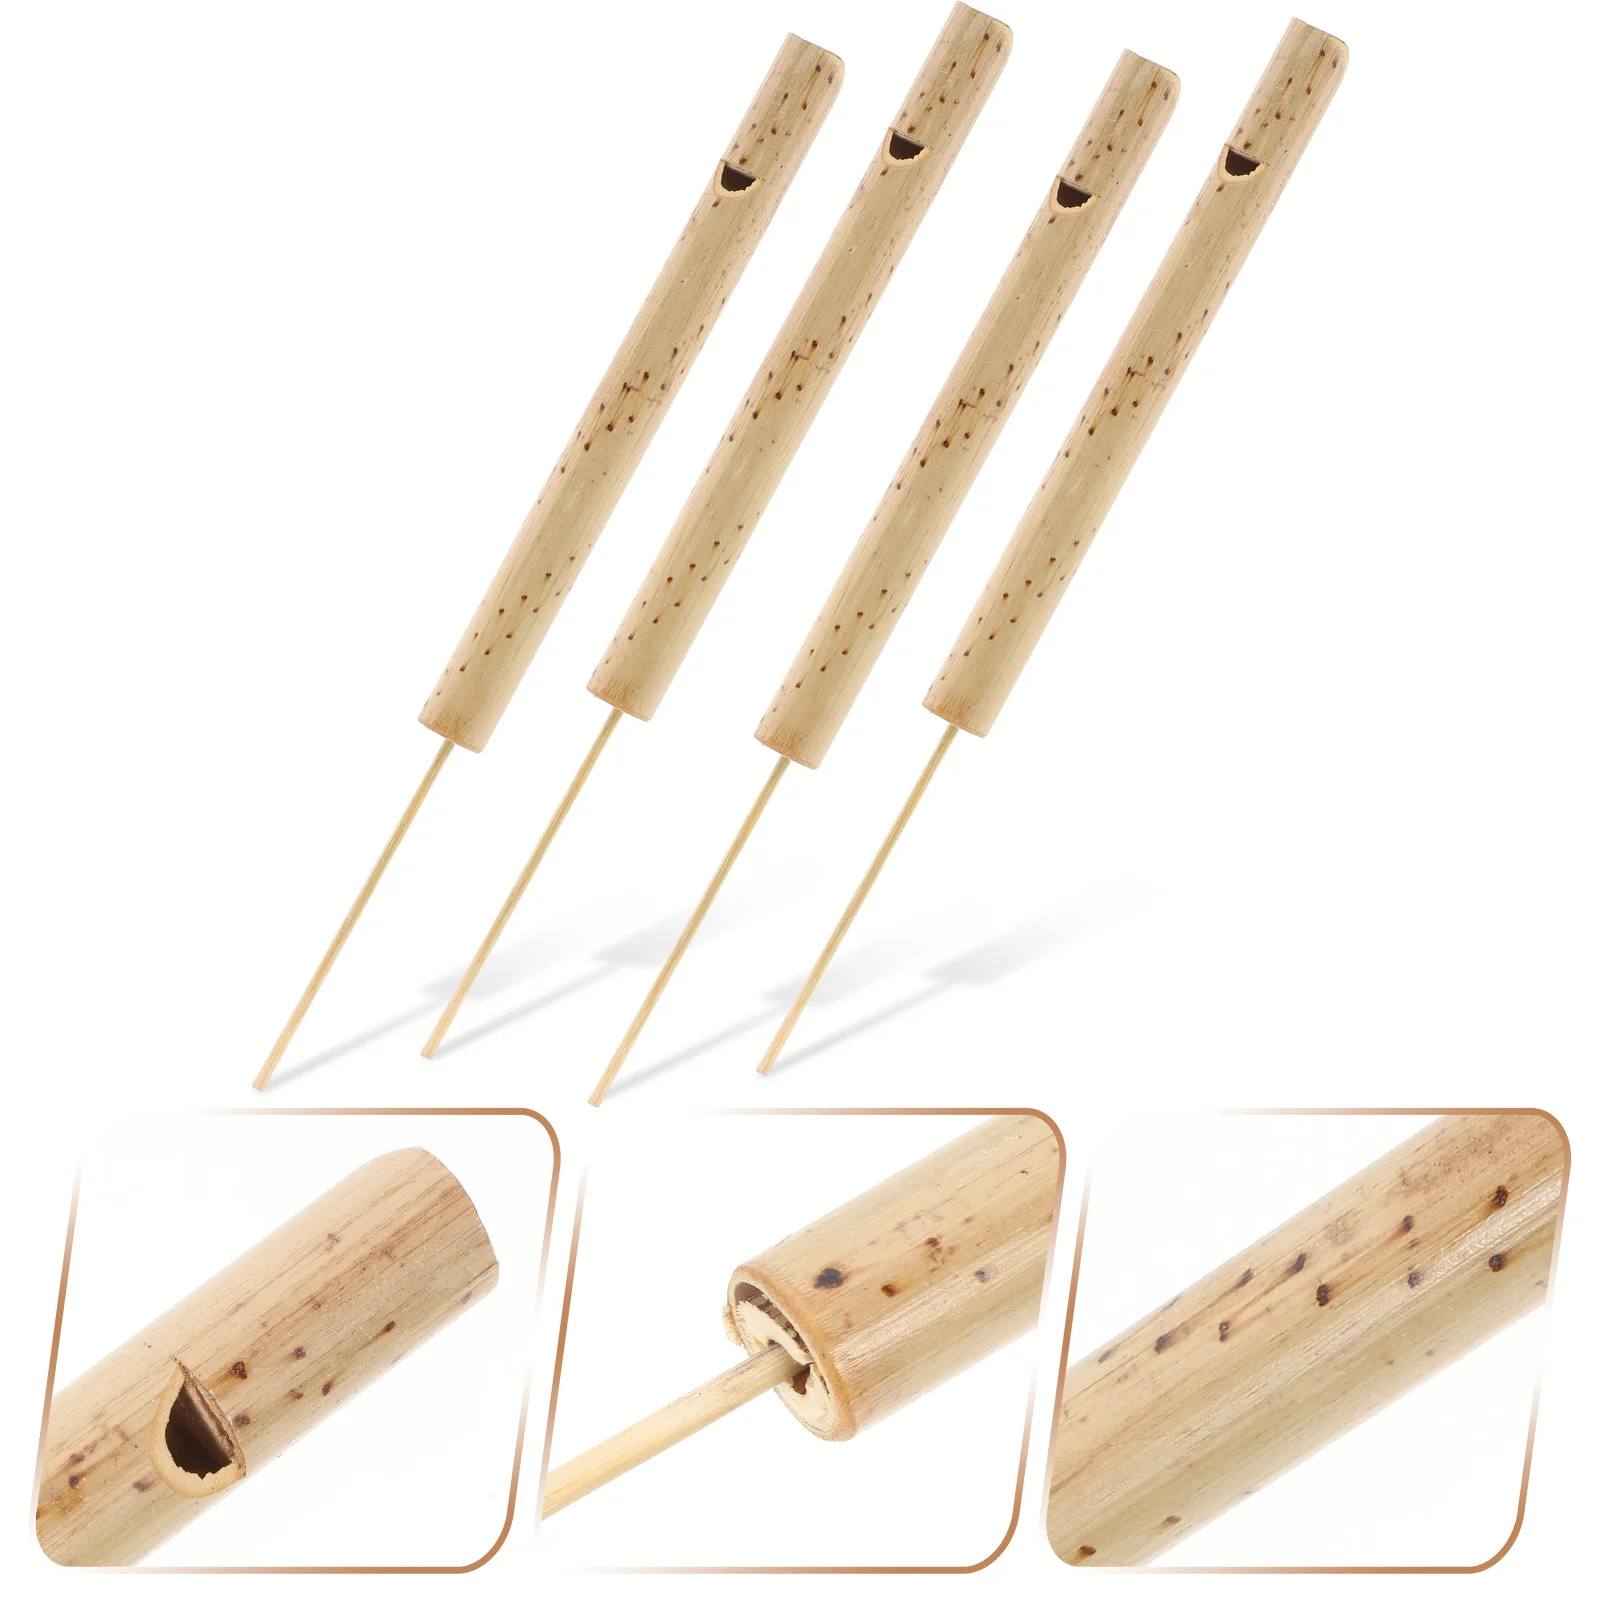 

4 Pcs Bamboo Flute Bird Whistle Survival Kids Music Toy Bulk Blower Playing Birdcall Child